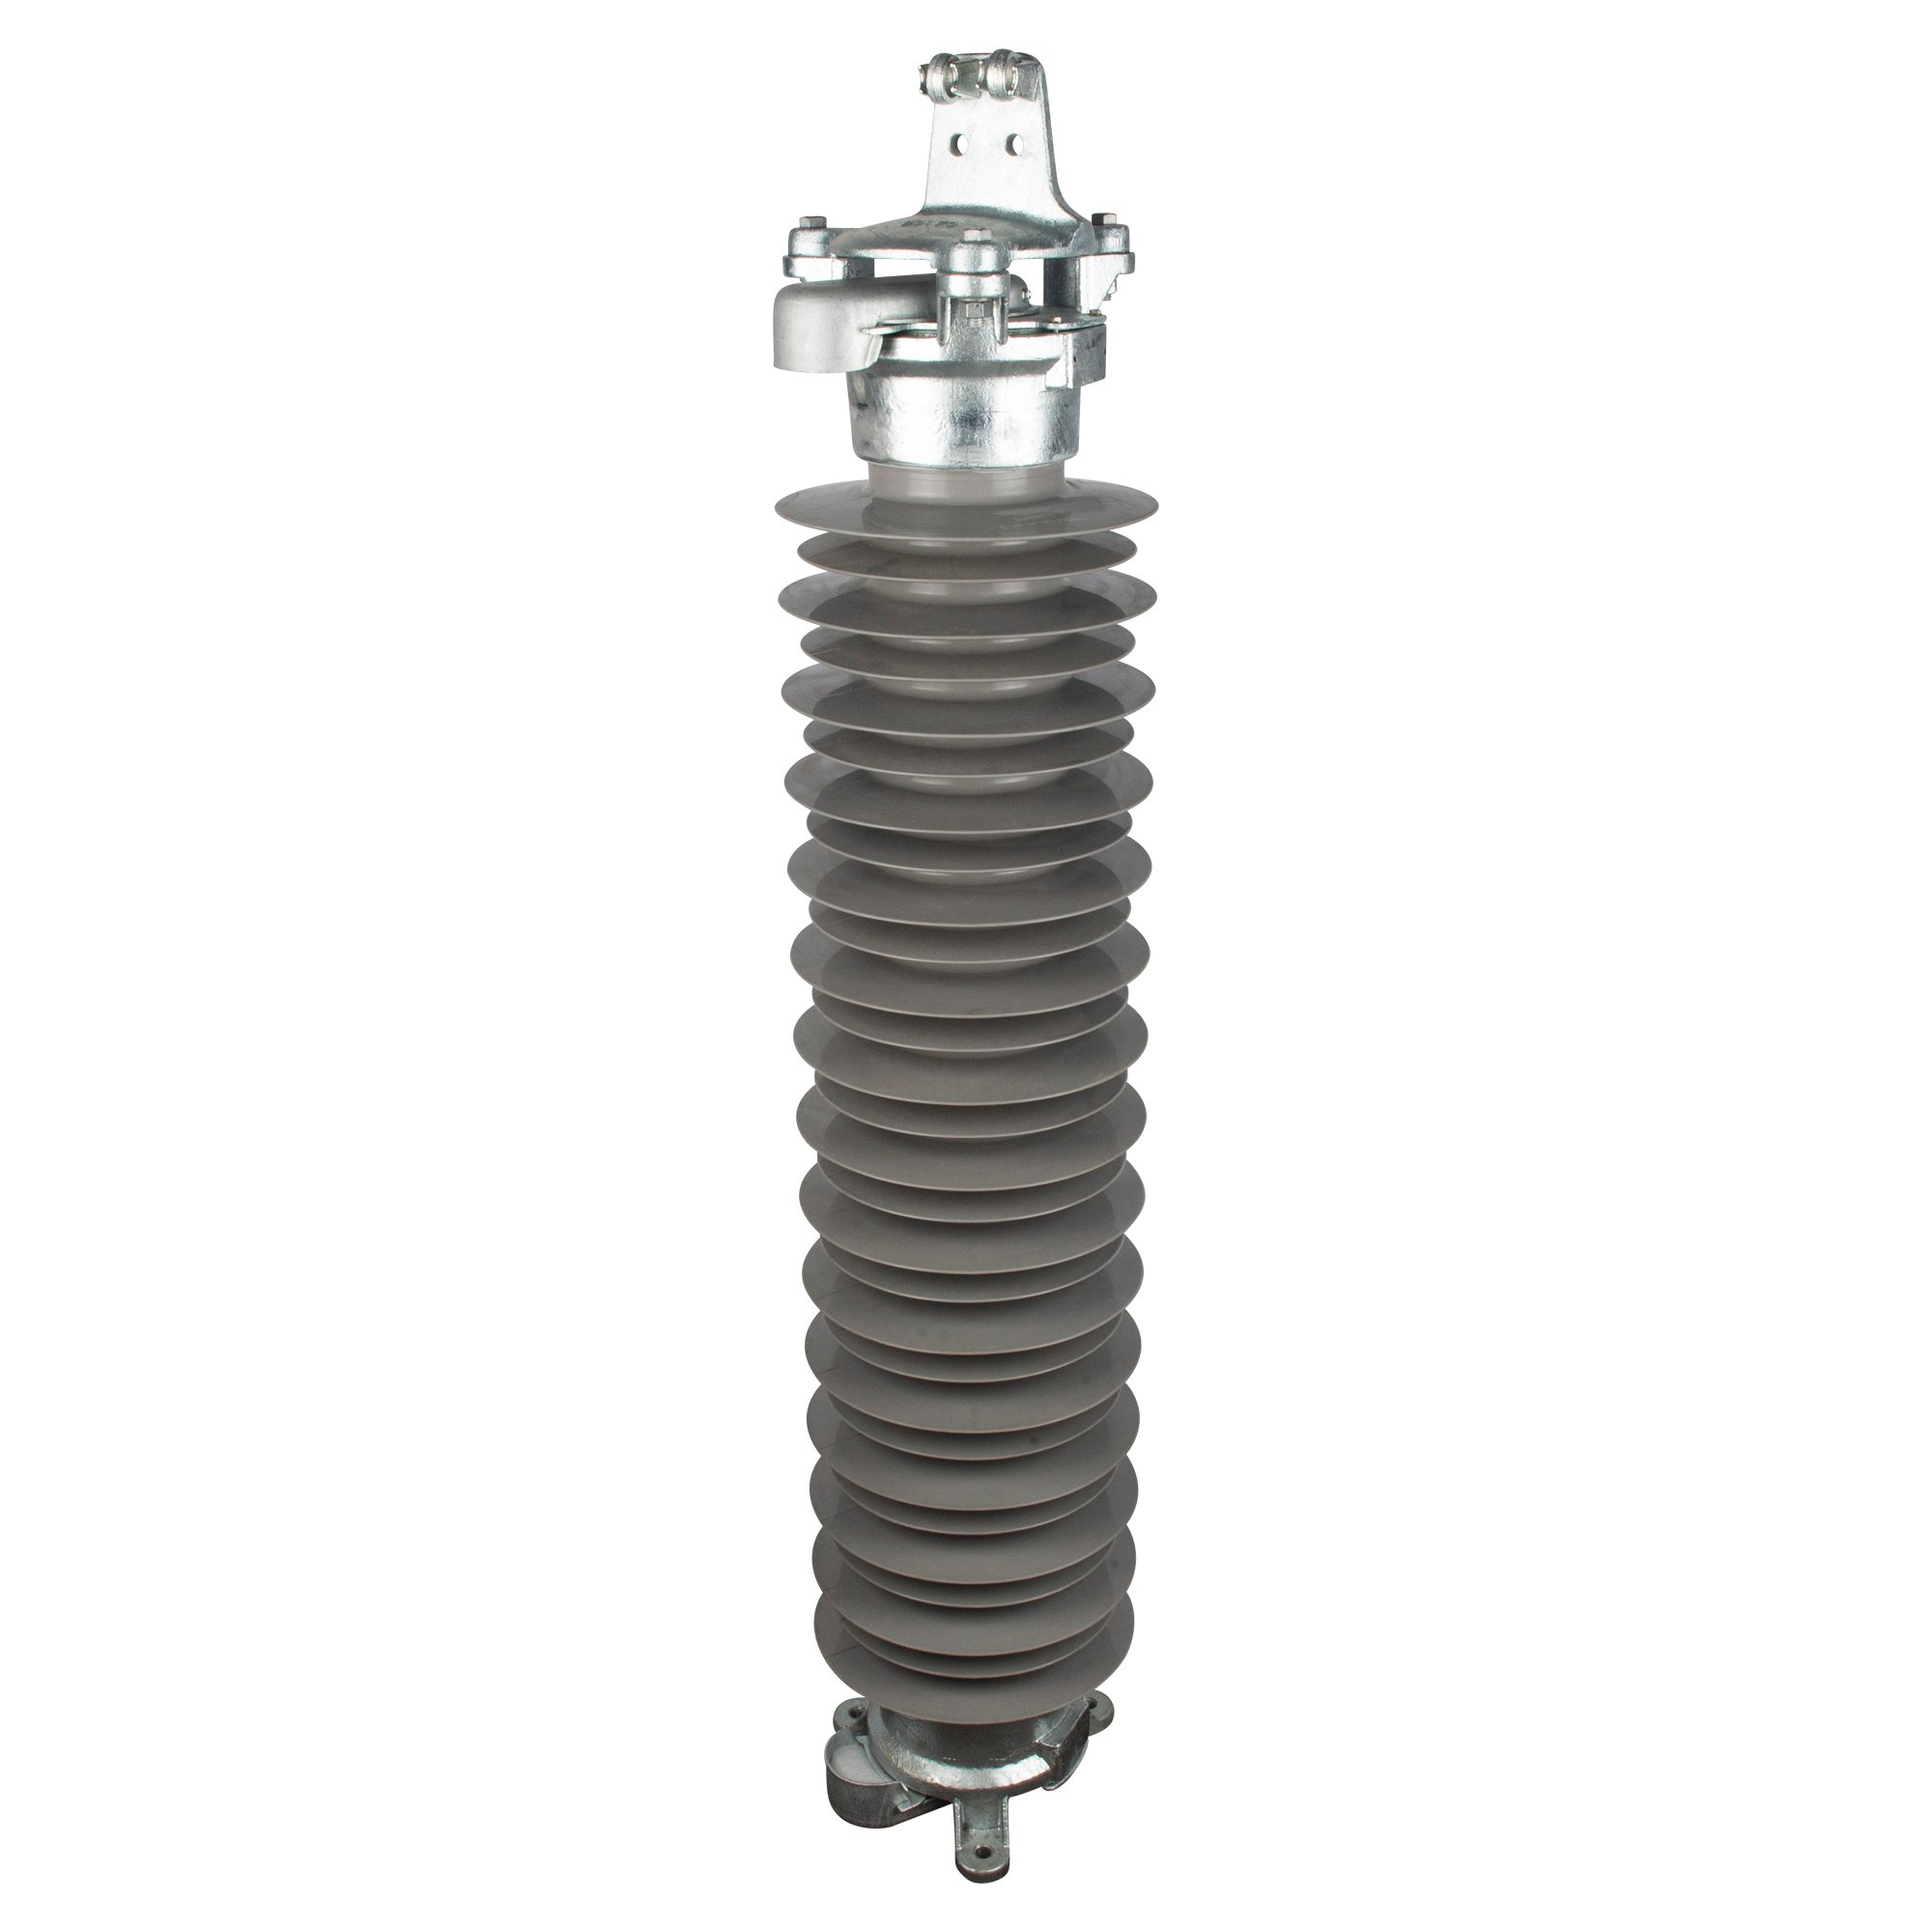 Getting Started with Surge Arrester Specifications